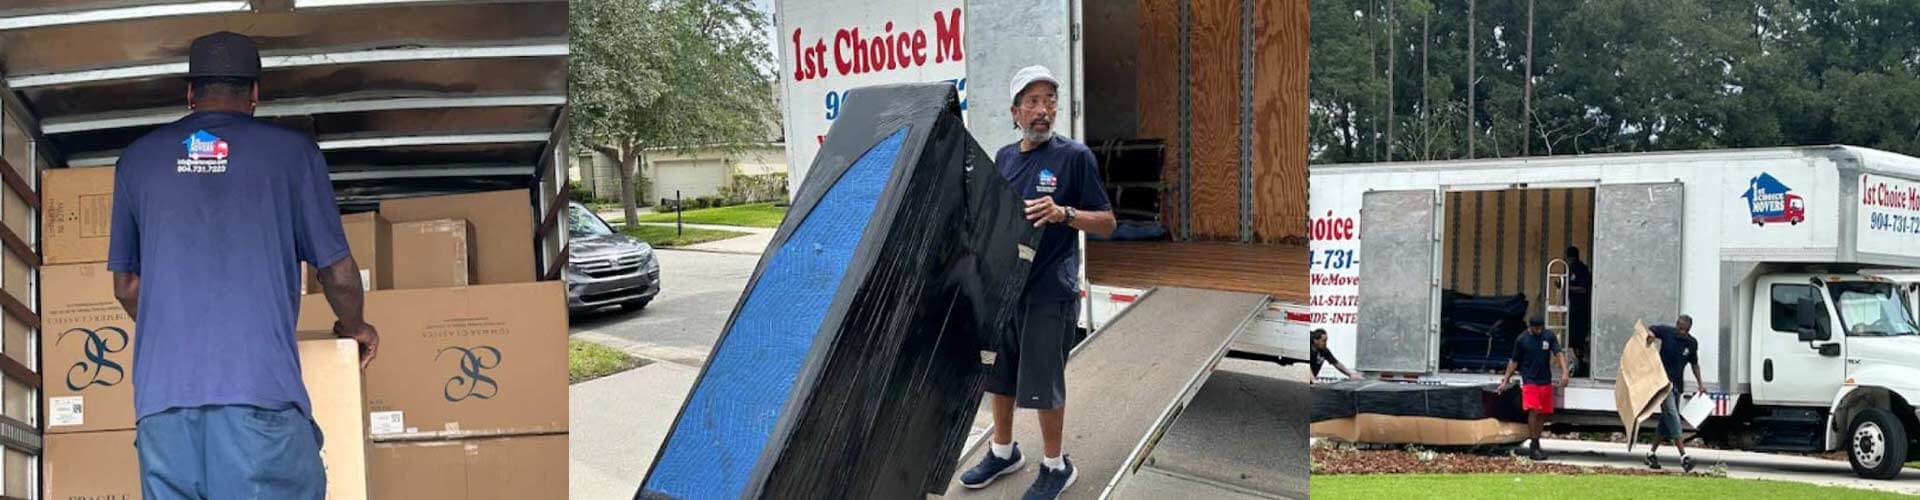 Contact us for senior moving services tailored to specific needs.